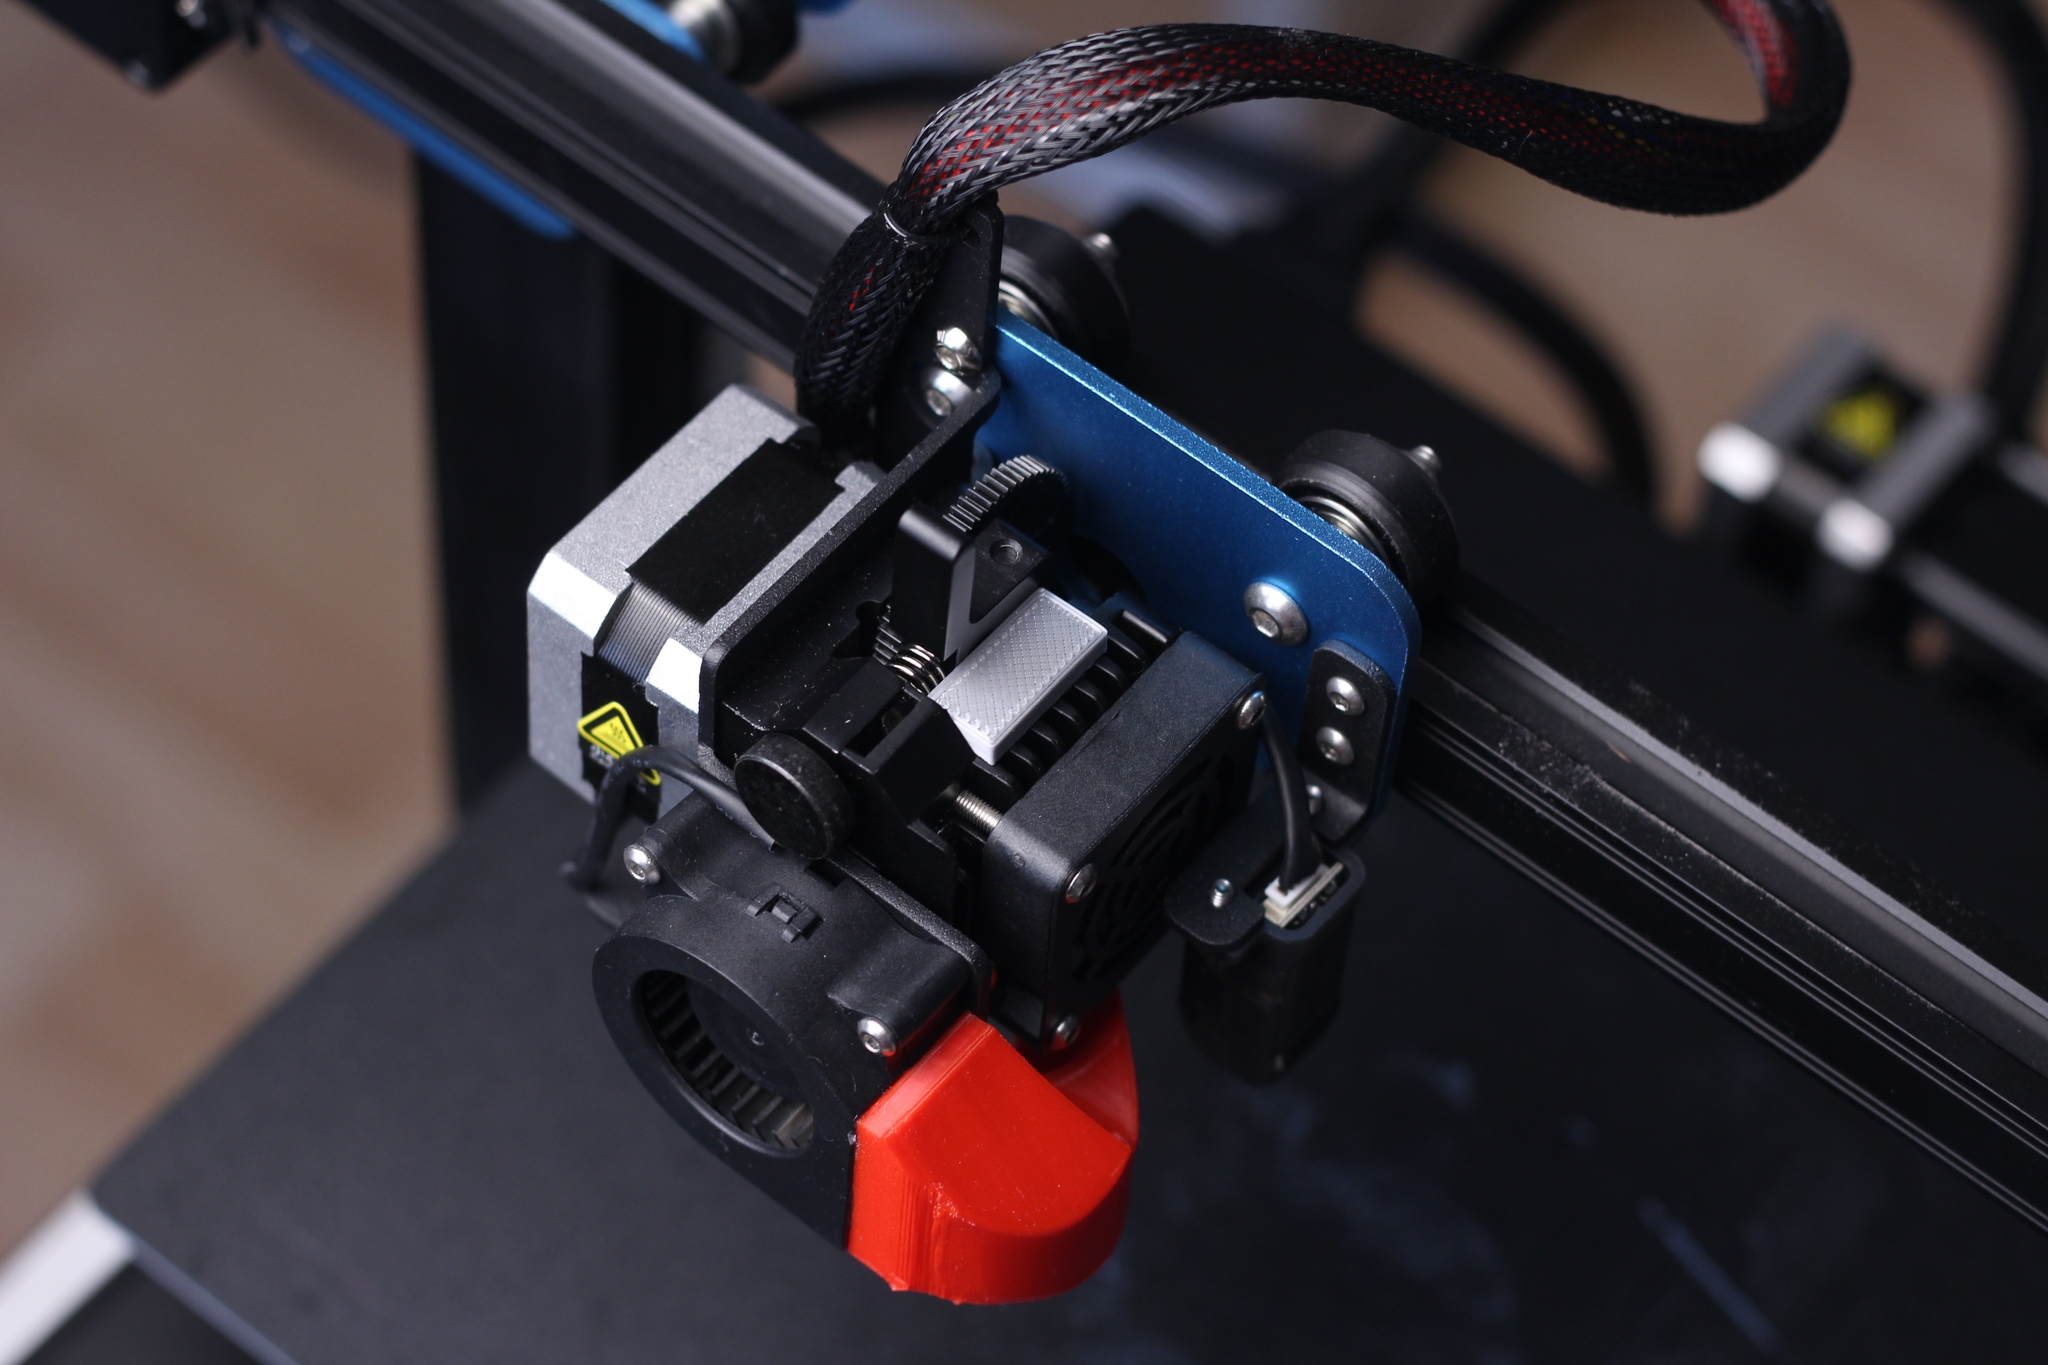 SV01 Pro Extruder with Part Cooling fan and idler stabilizer2 | Sovol SV01 Pro Review: Good, but not Great